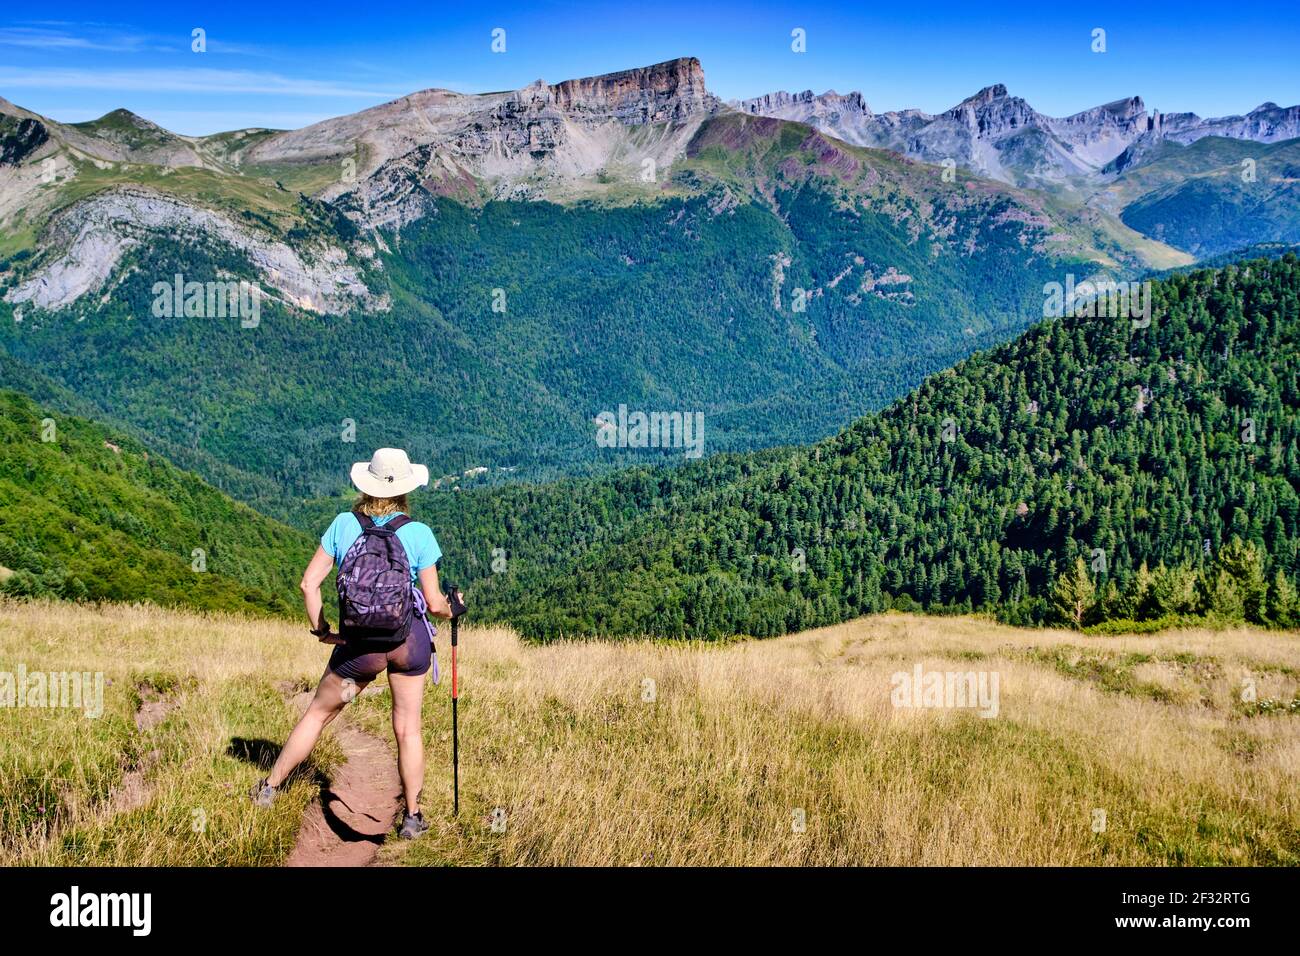 Hiker woman in a mountains and grasslands landscape. Castillo de Acher mountain route. Valles Occidentales Natural Park. Hecho valley. Pyrenees mounta Stock Photo